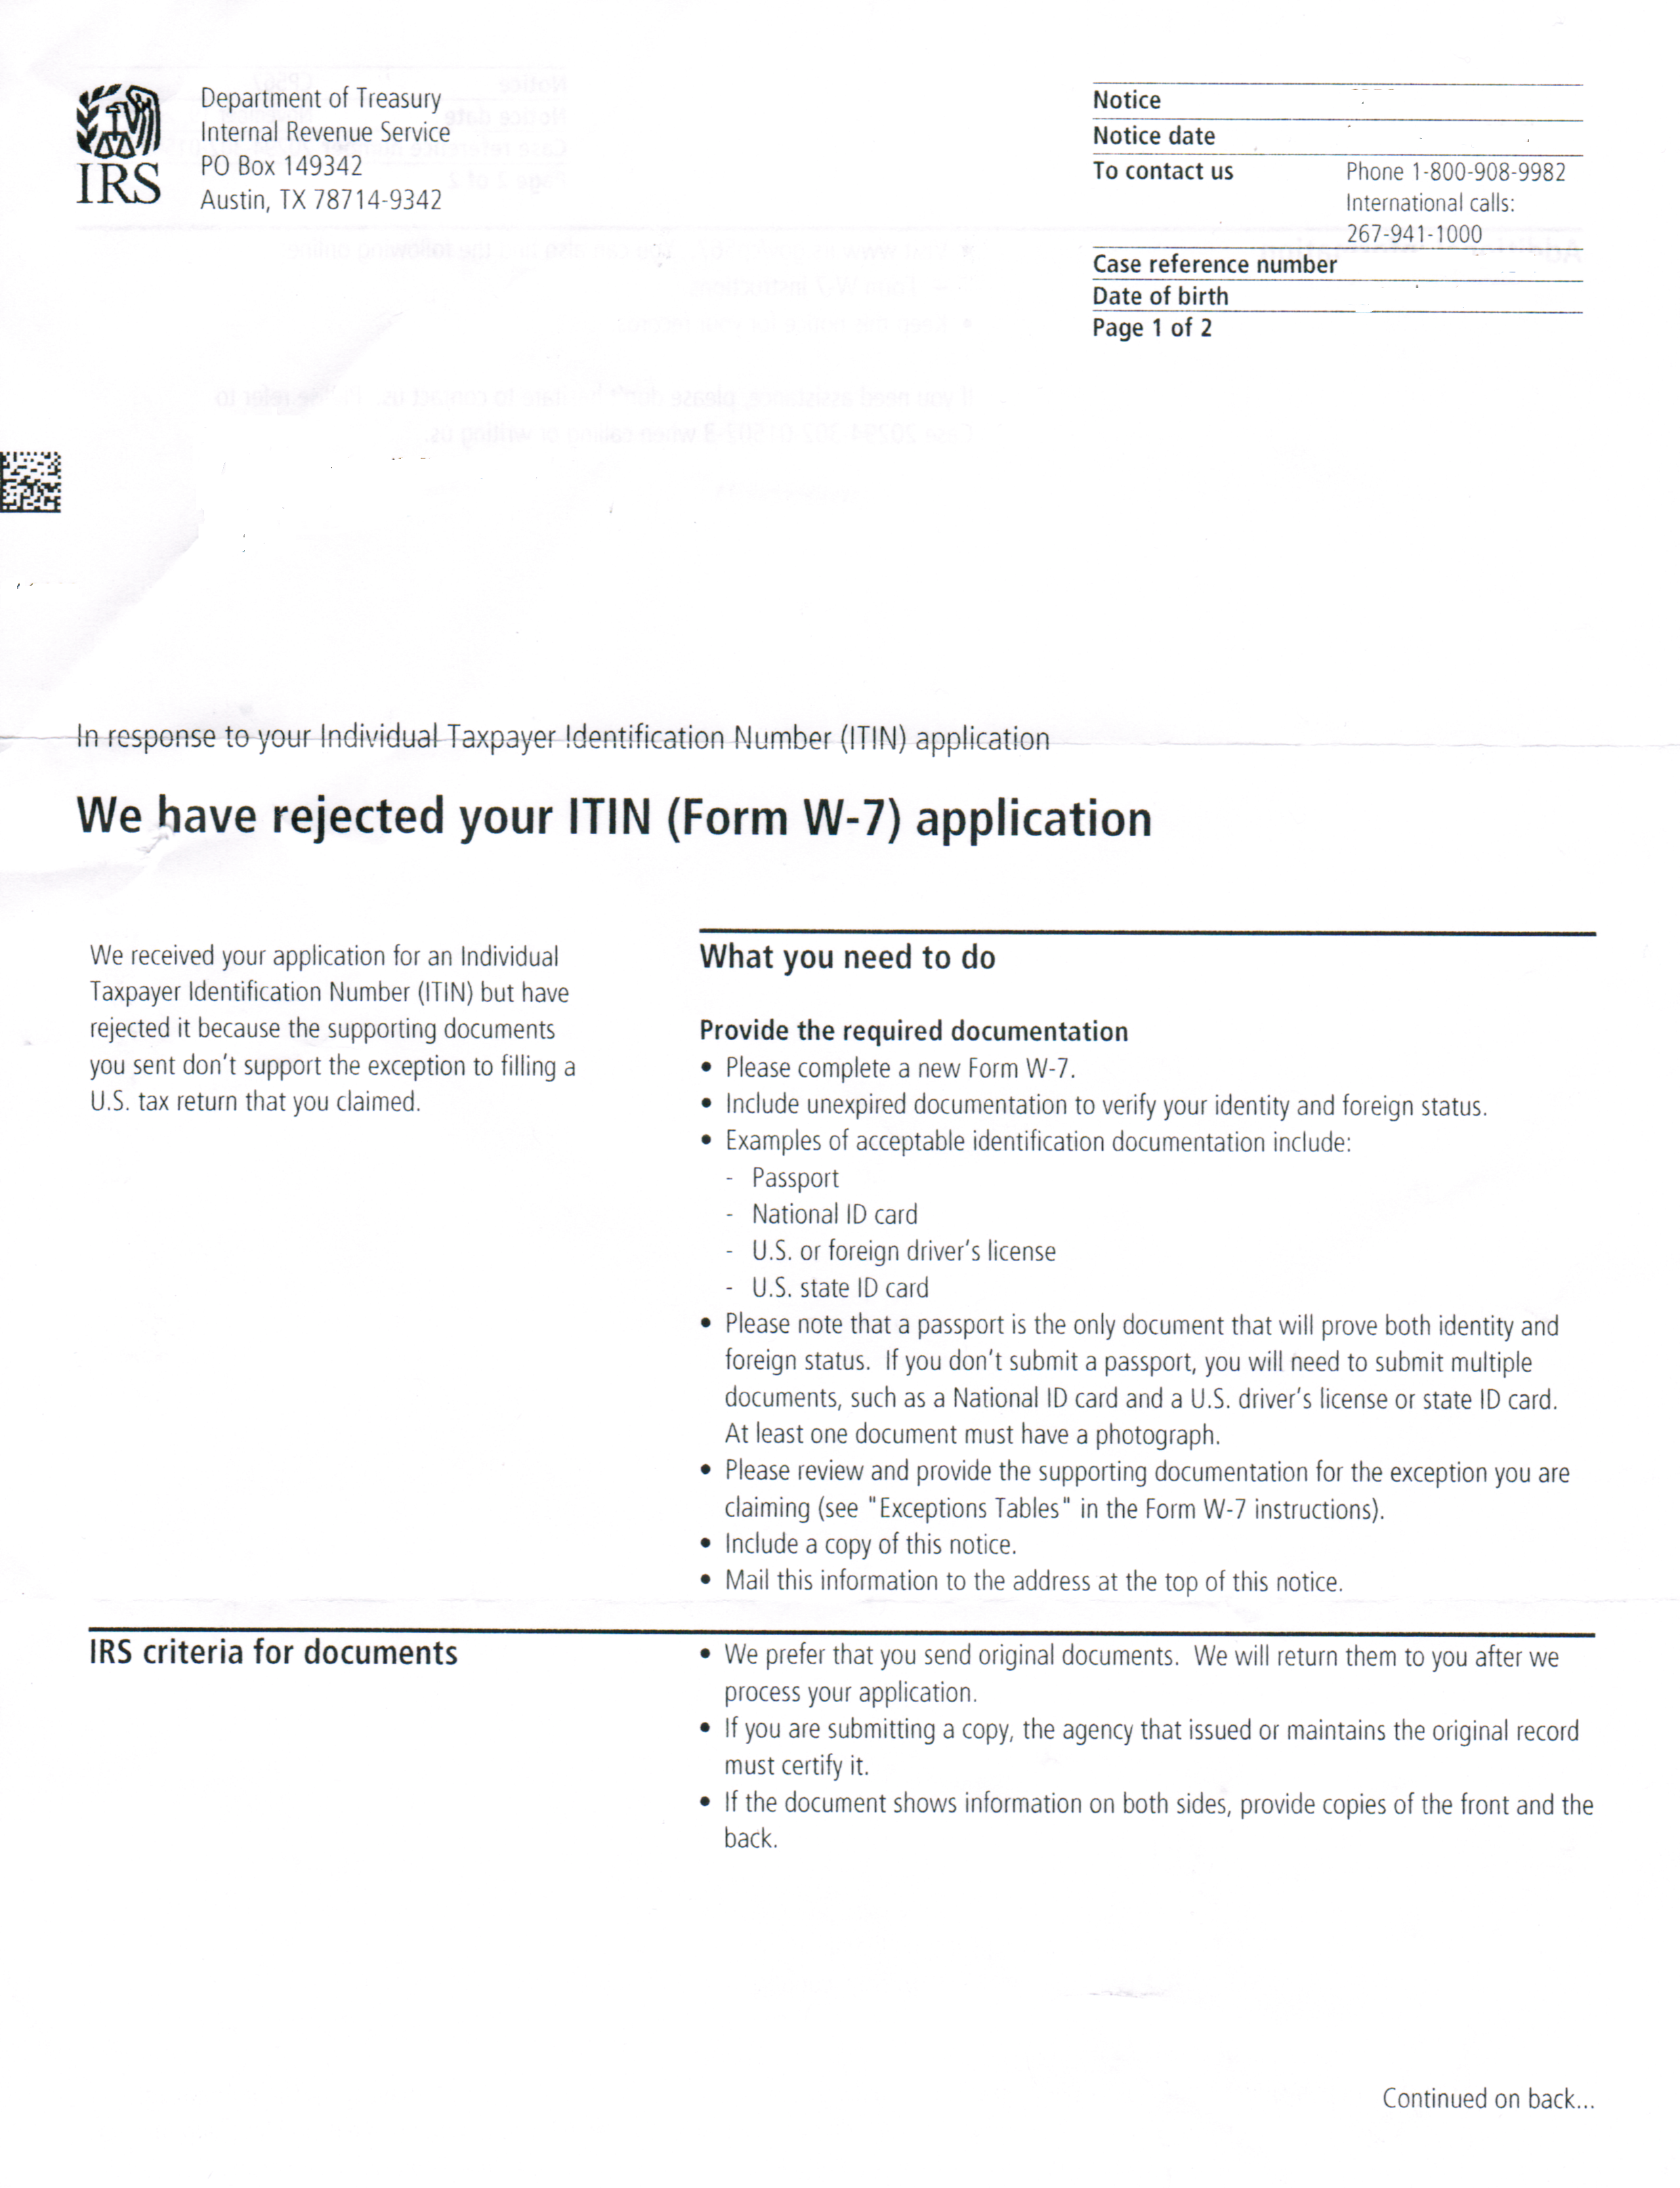 IRS ITN Rejection Letter